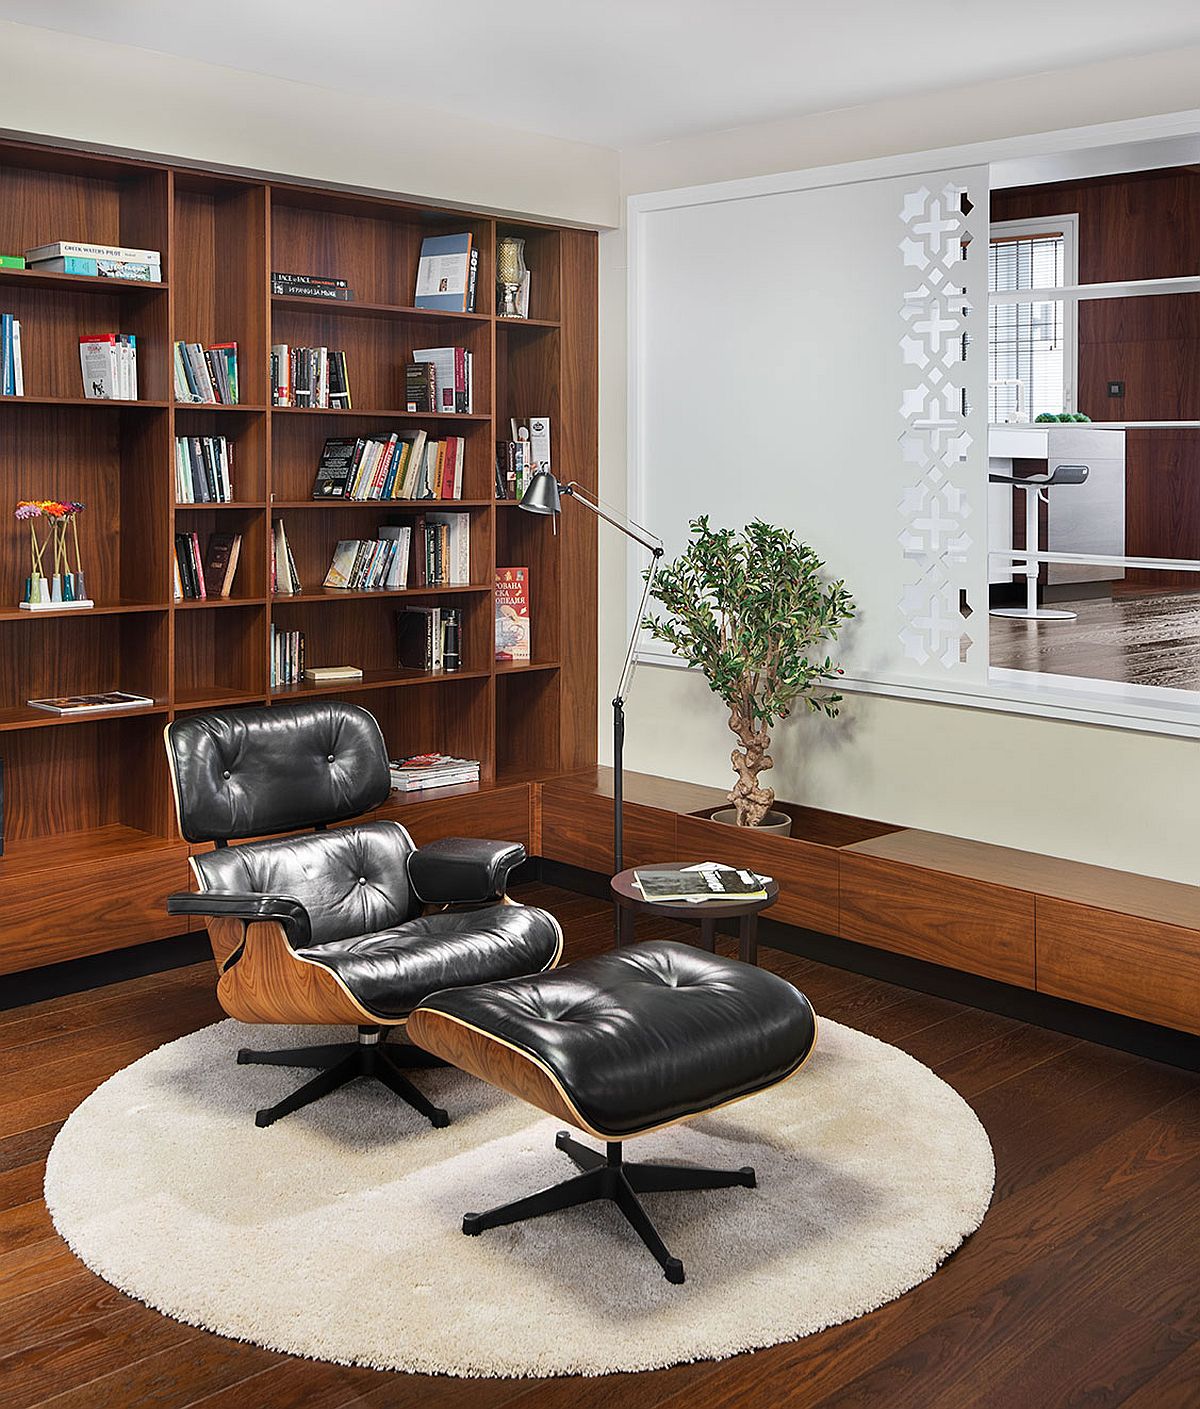 Cozy reading zone next to the bookshelf with the Eames Lounger